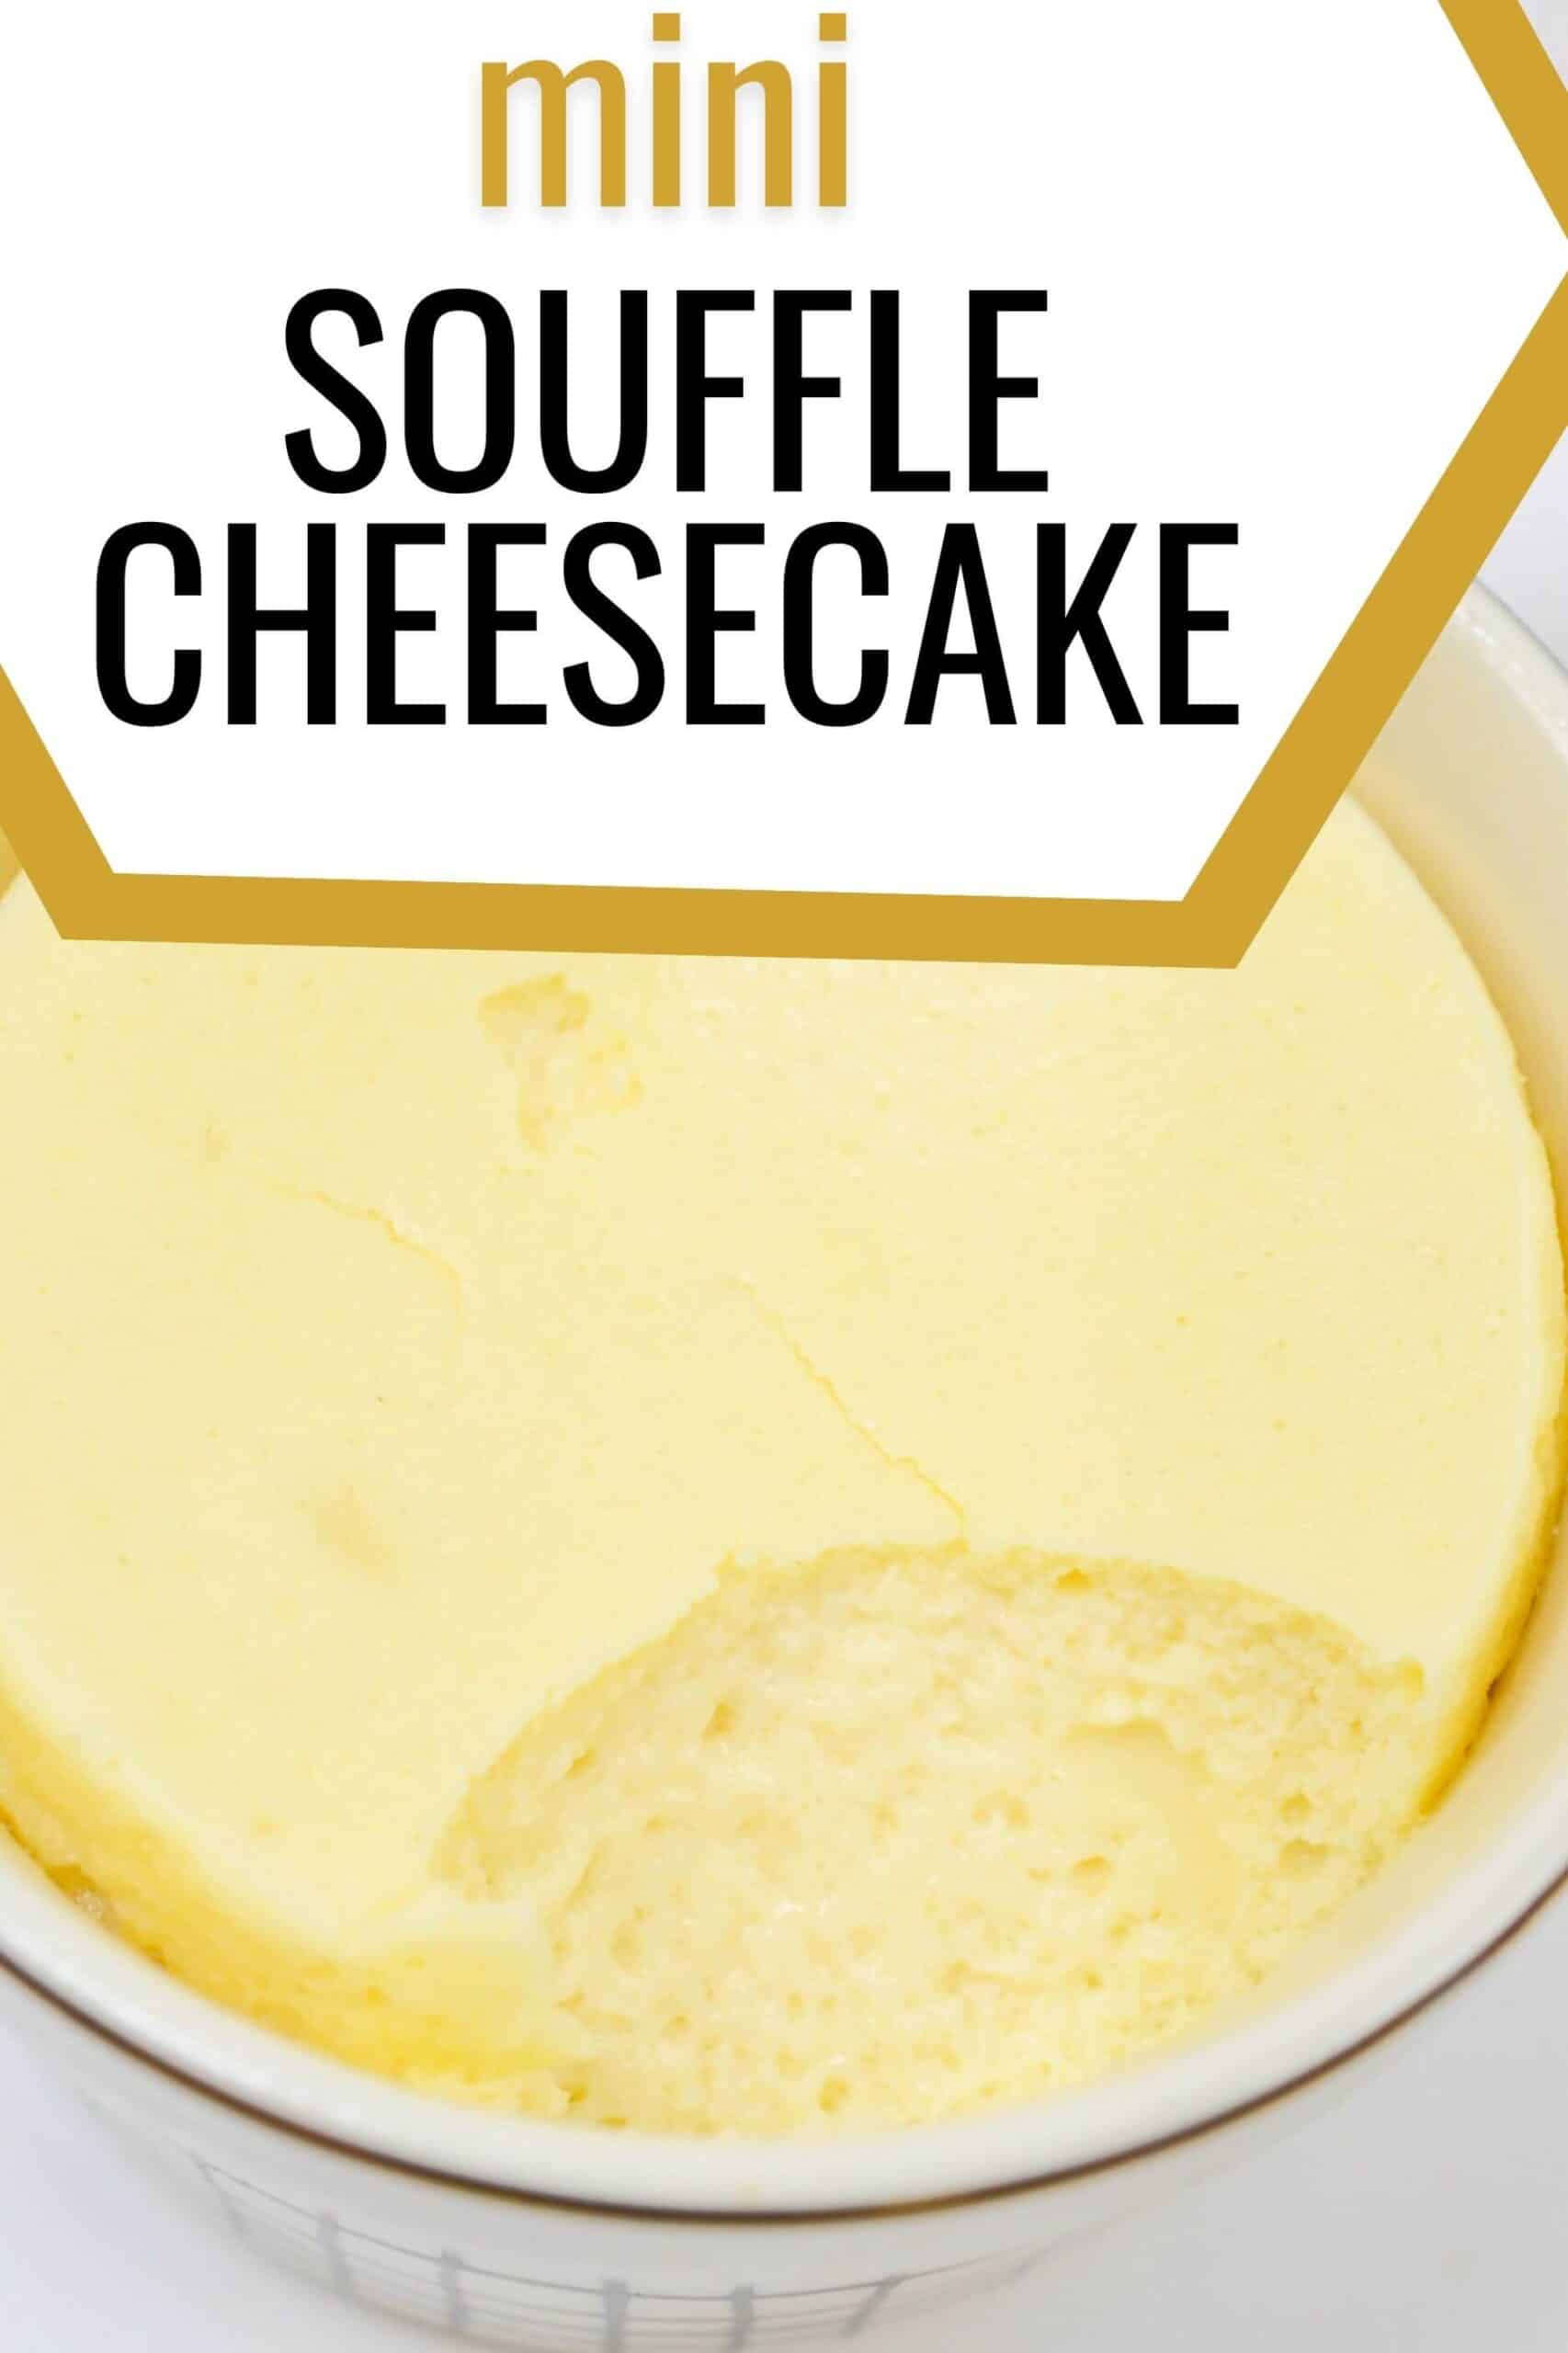 Mini souffle cheesecake image with text.